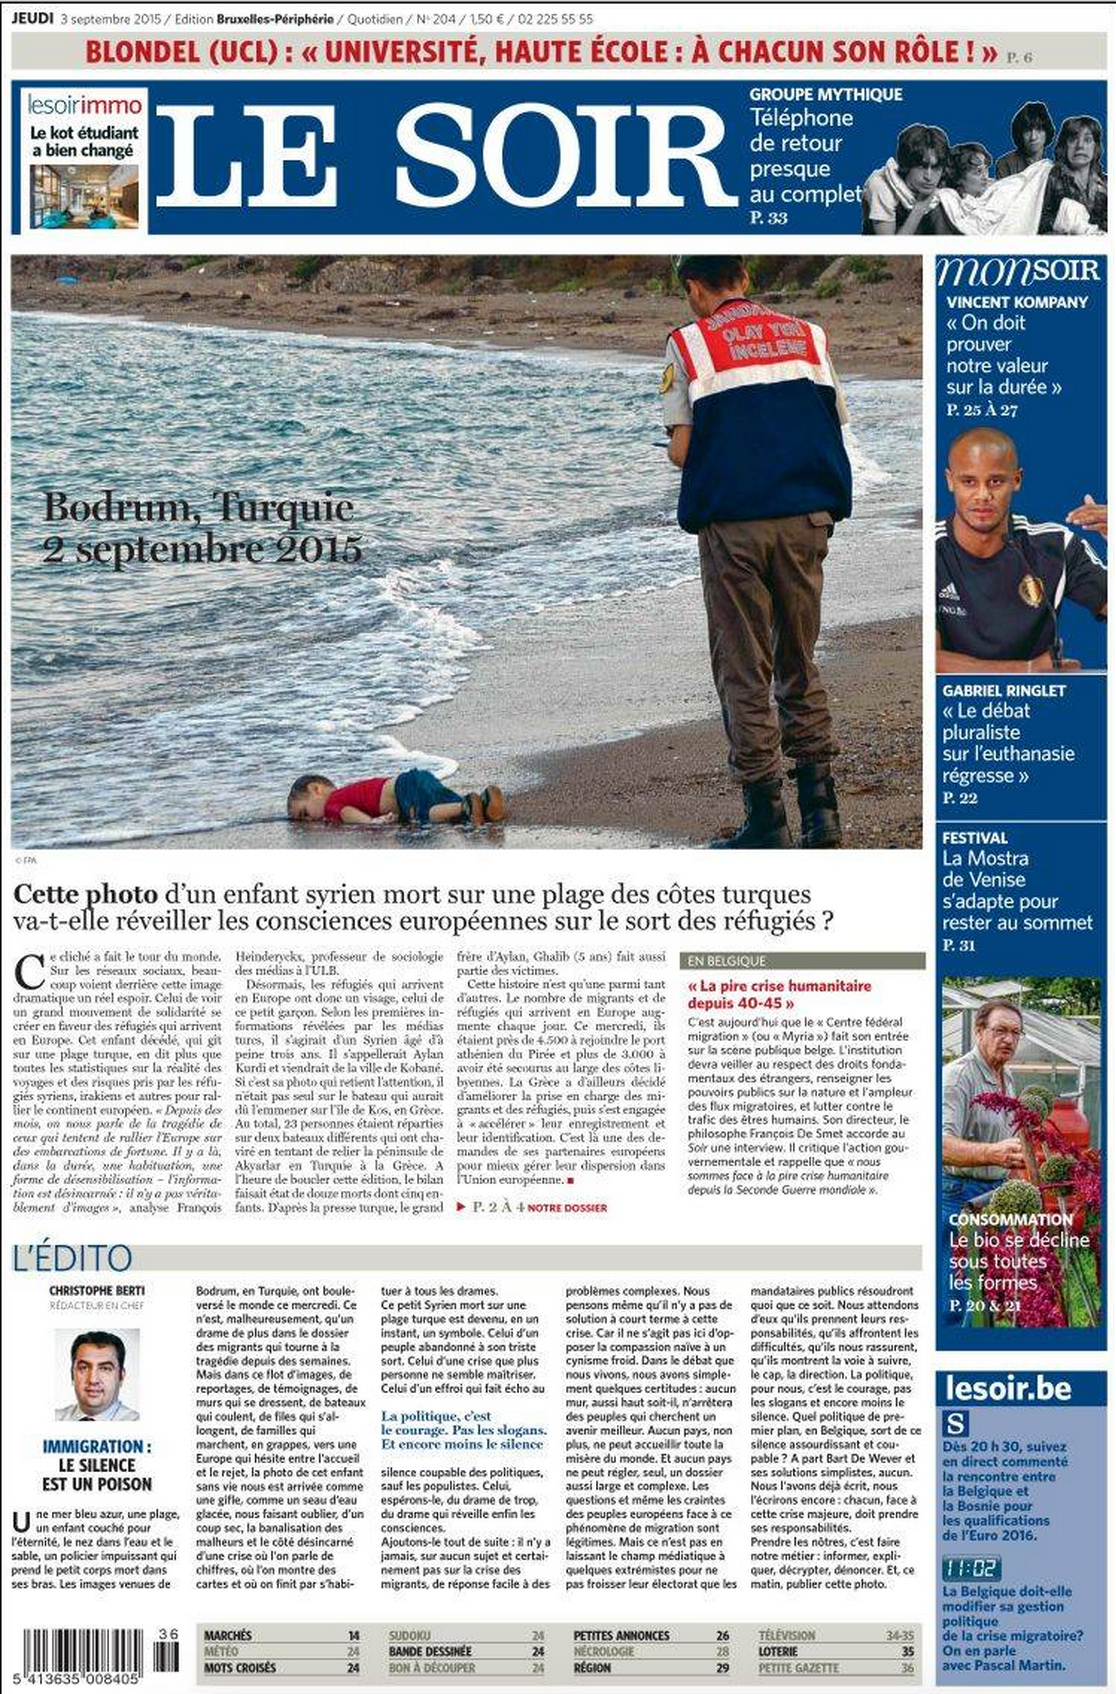 Drowned Migrant Boy Le Soir front page